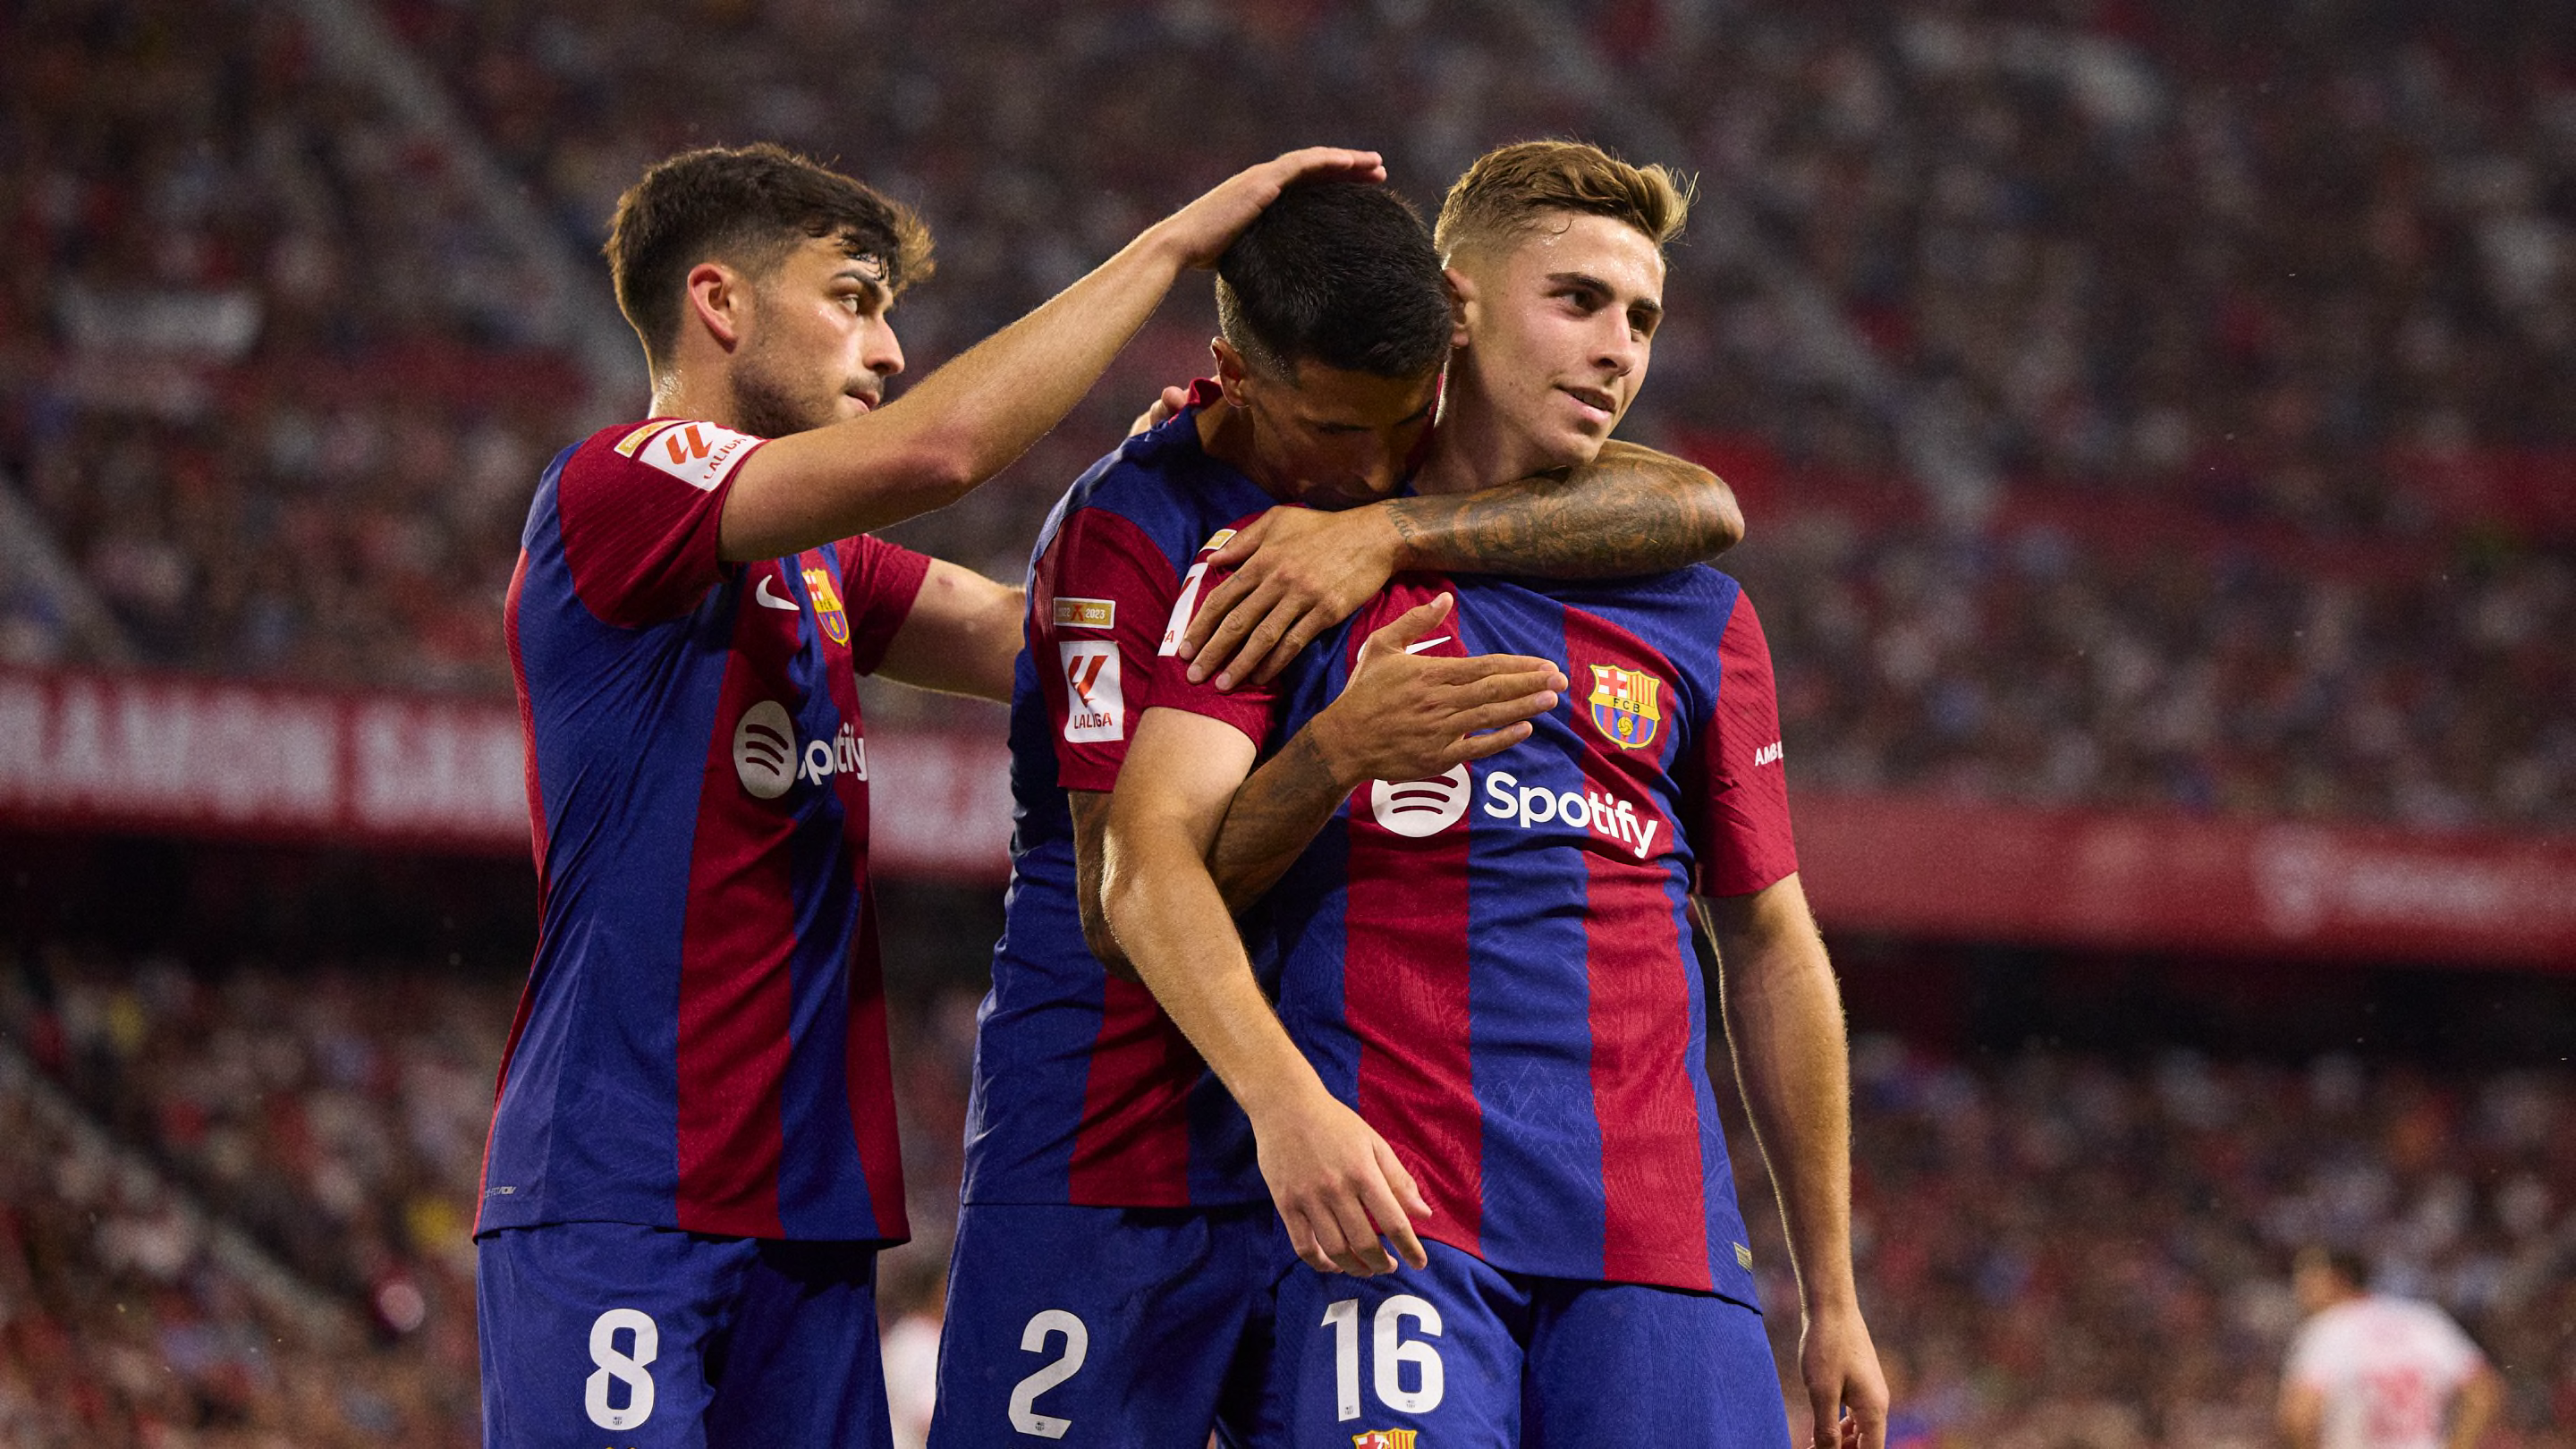 Sevilla 1-2 Barcelona: Player ratings as Xavi bows out with a victory